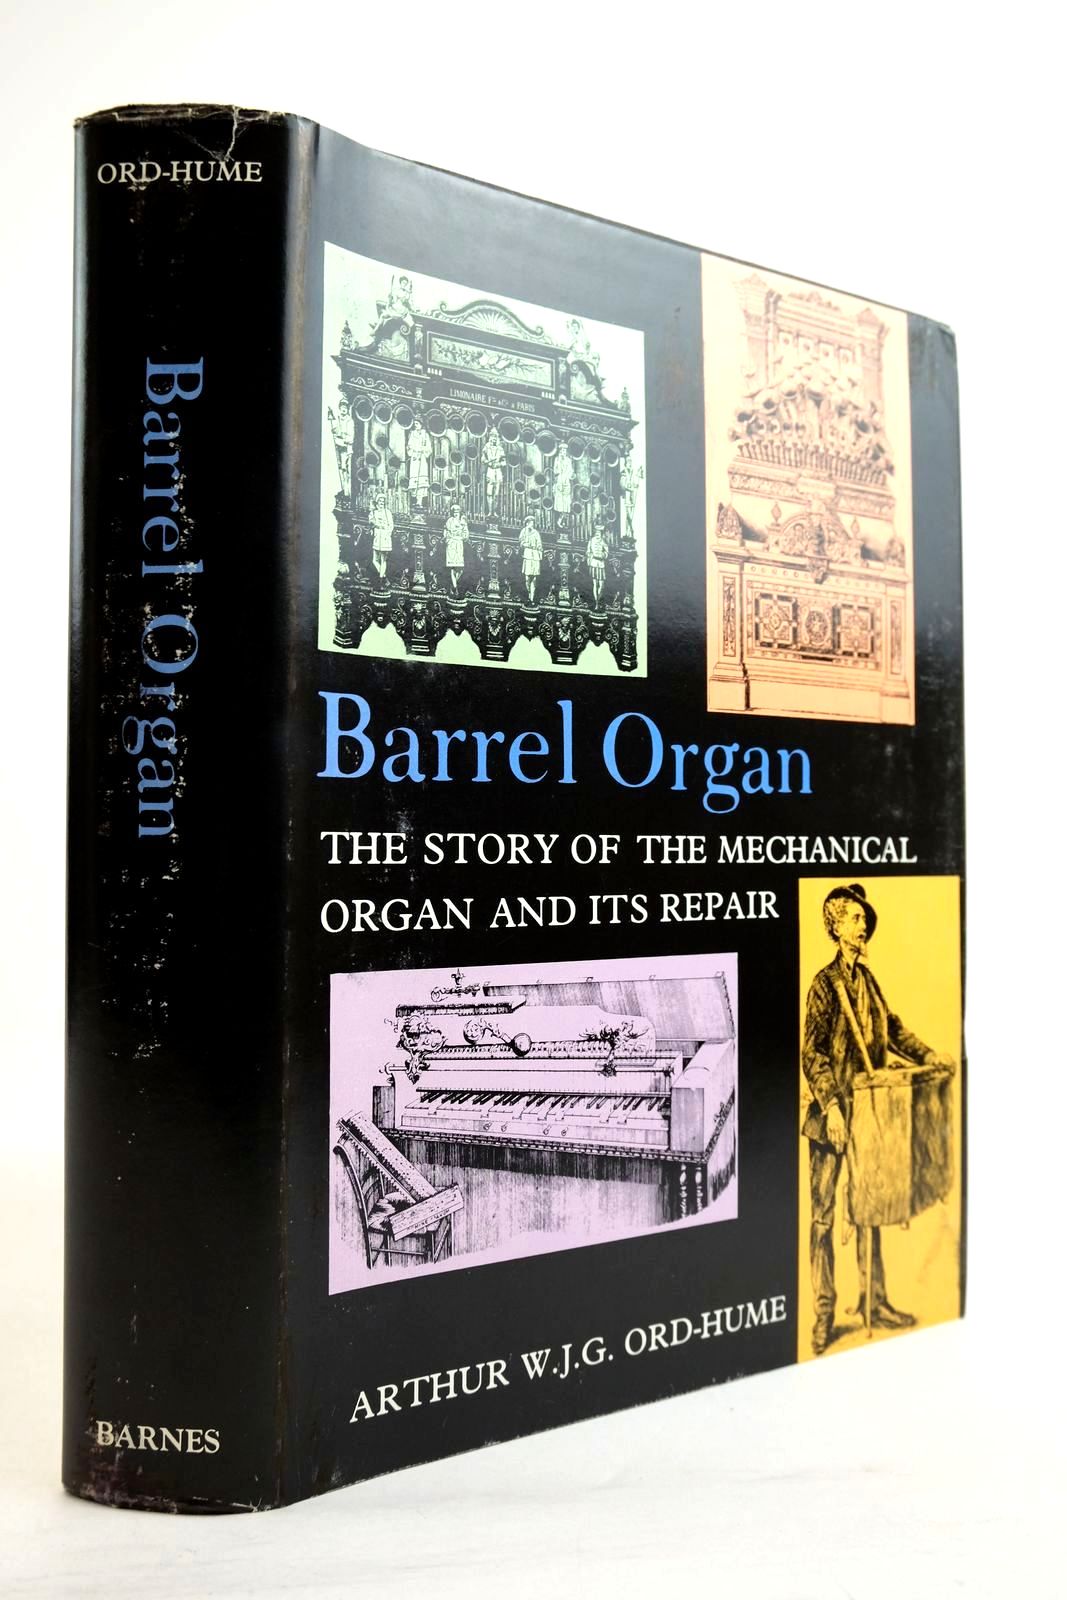 BARREL ORGAN THE STORY OF THE MECHANICAL ORGAN AND ITS REPAIR - Ord-Hume, Arthur W.J.G.